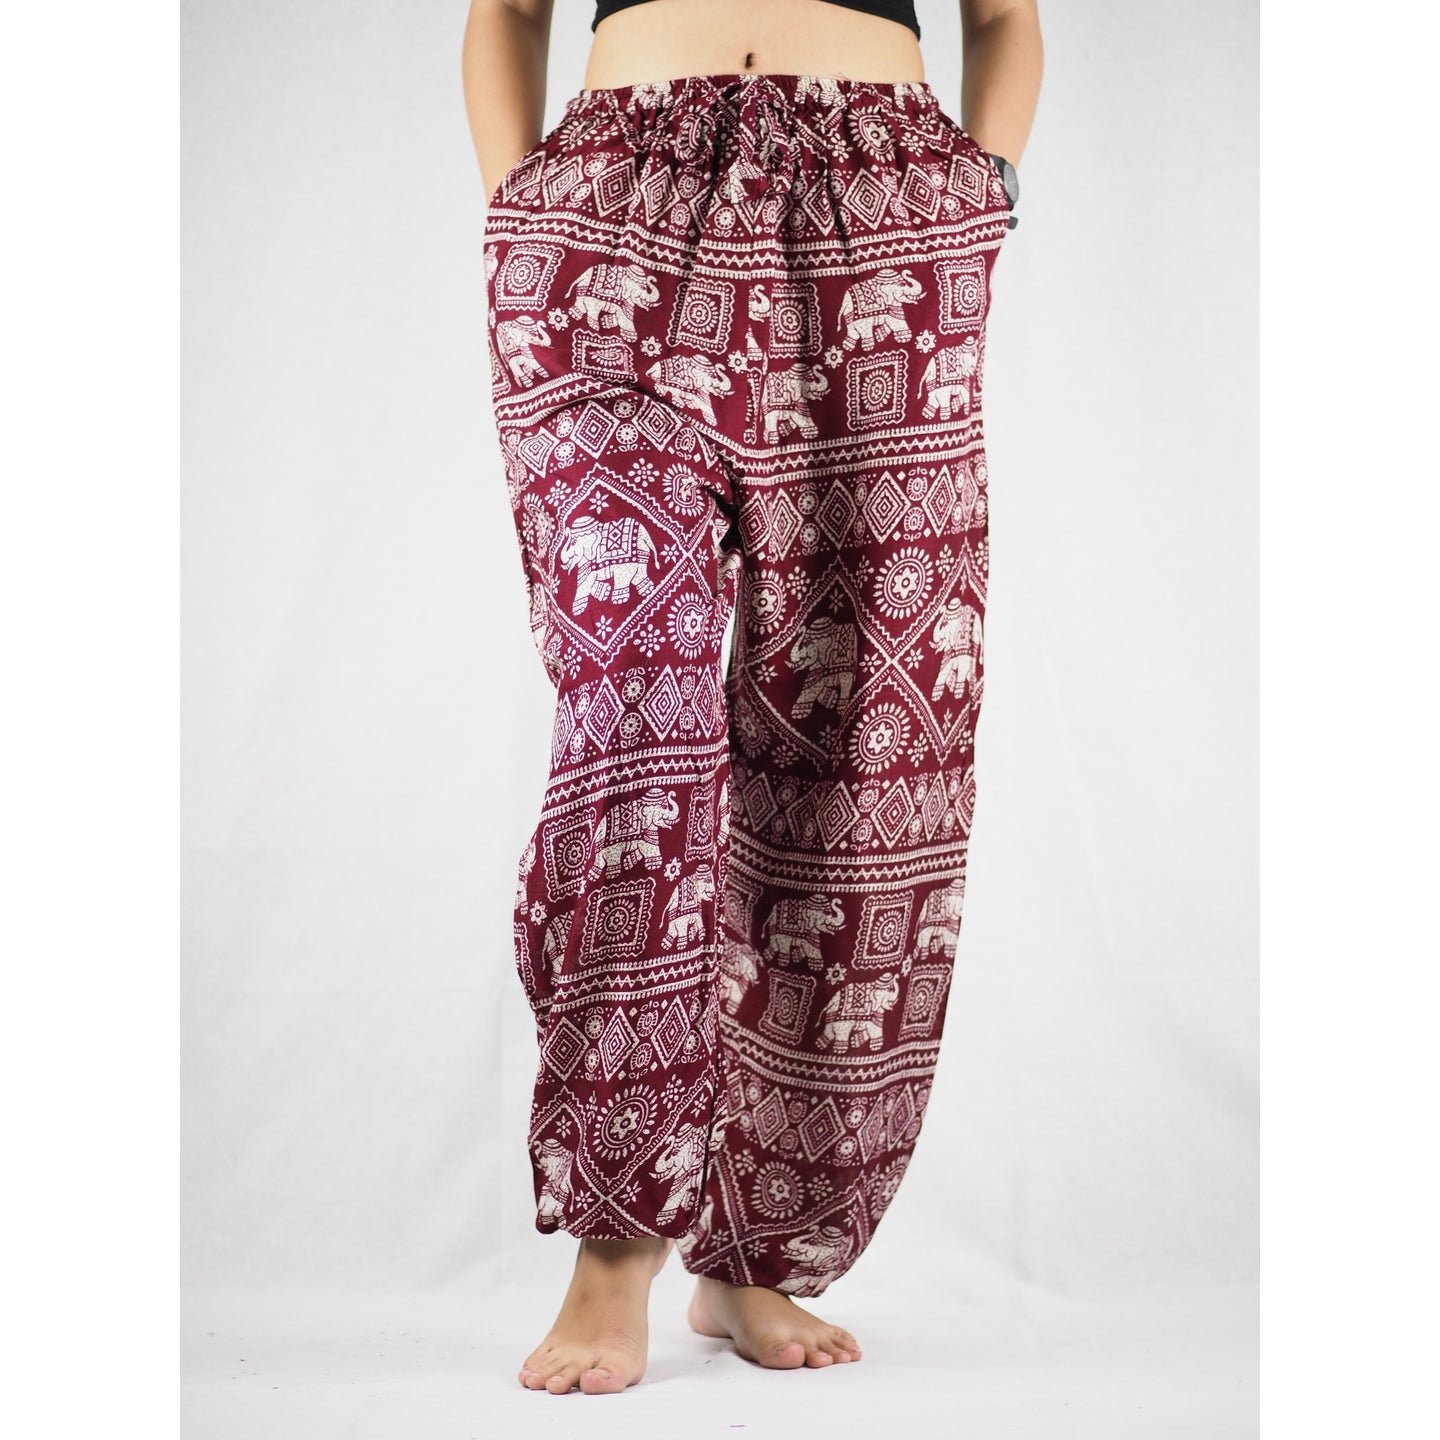 African Elephant Unisex Drawstring Genie Pants in Red PP0110 020004 03